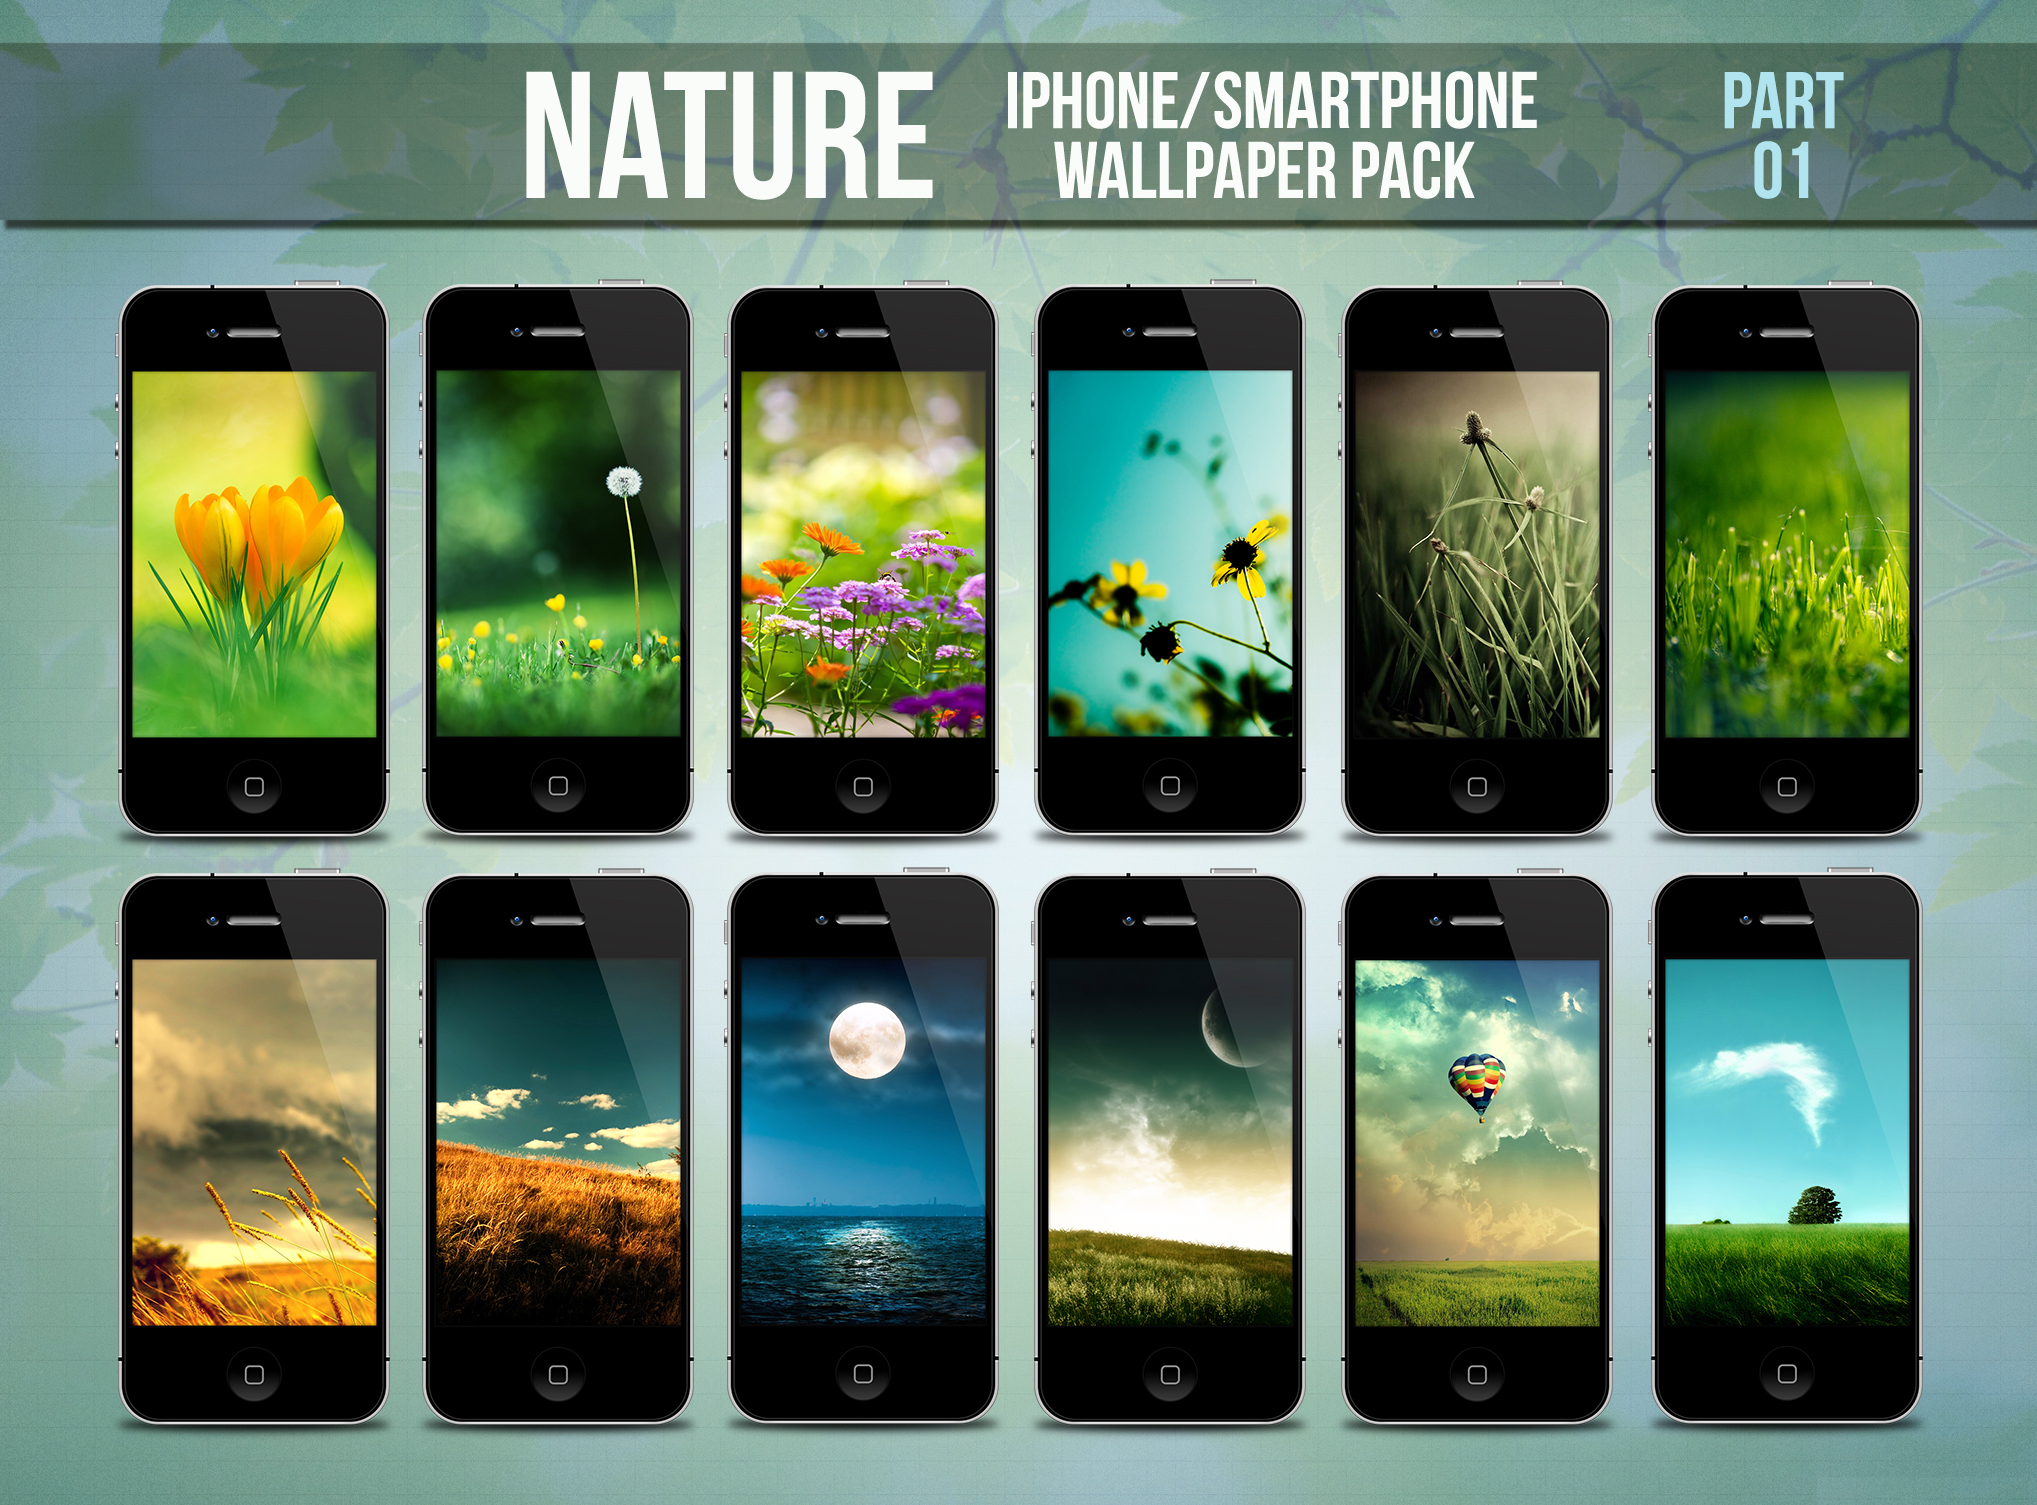 Nature iPhone/Smartphone Wallpaper Pack Part 1 by limav on DeviantArt